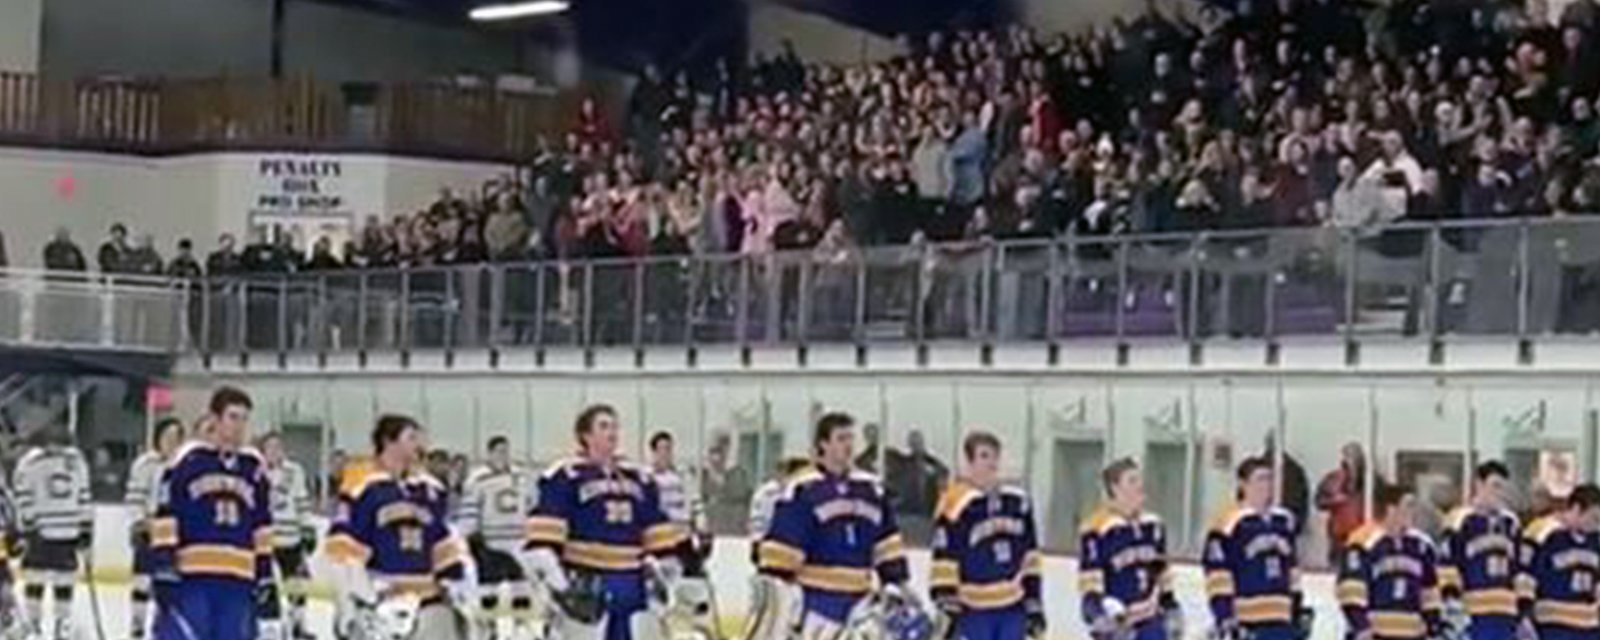 High School hockey fans step up to sing National Anthem after arena PA system malfunctions.